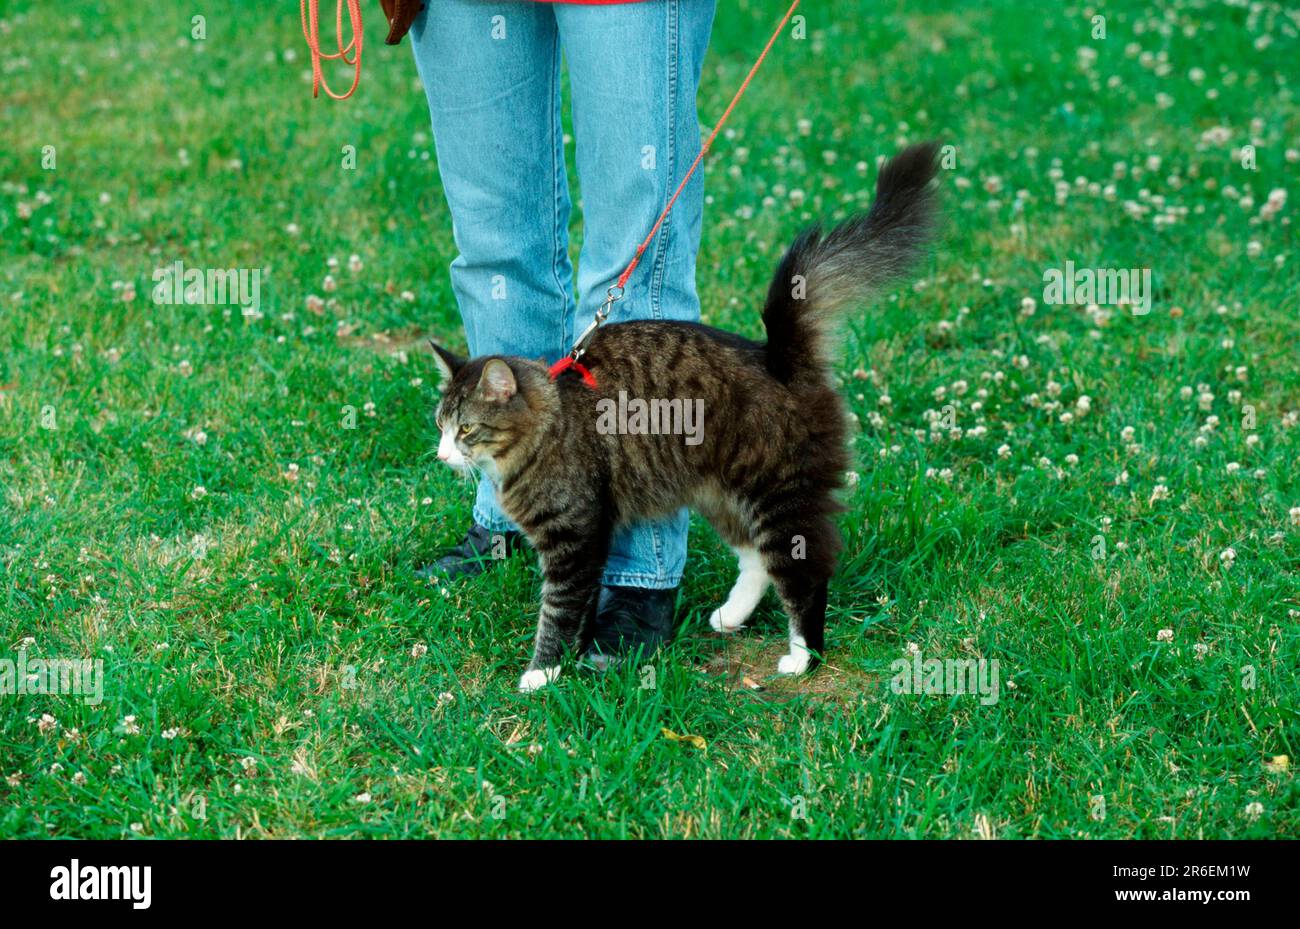 Norwegian Forest Cat on a leash, arching its back Stock Photo